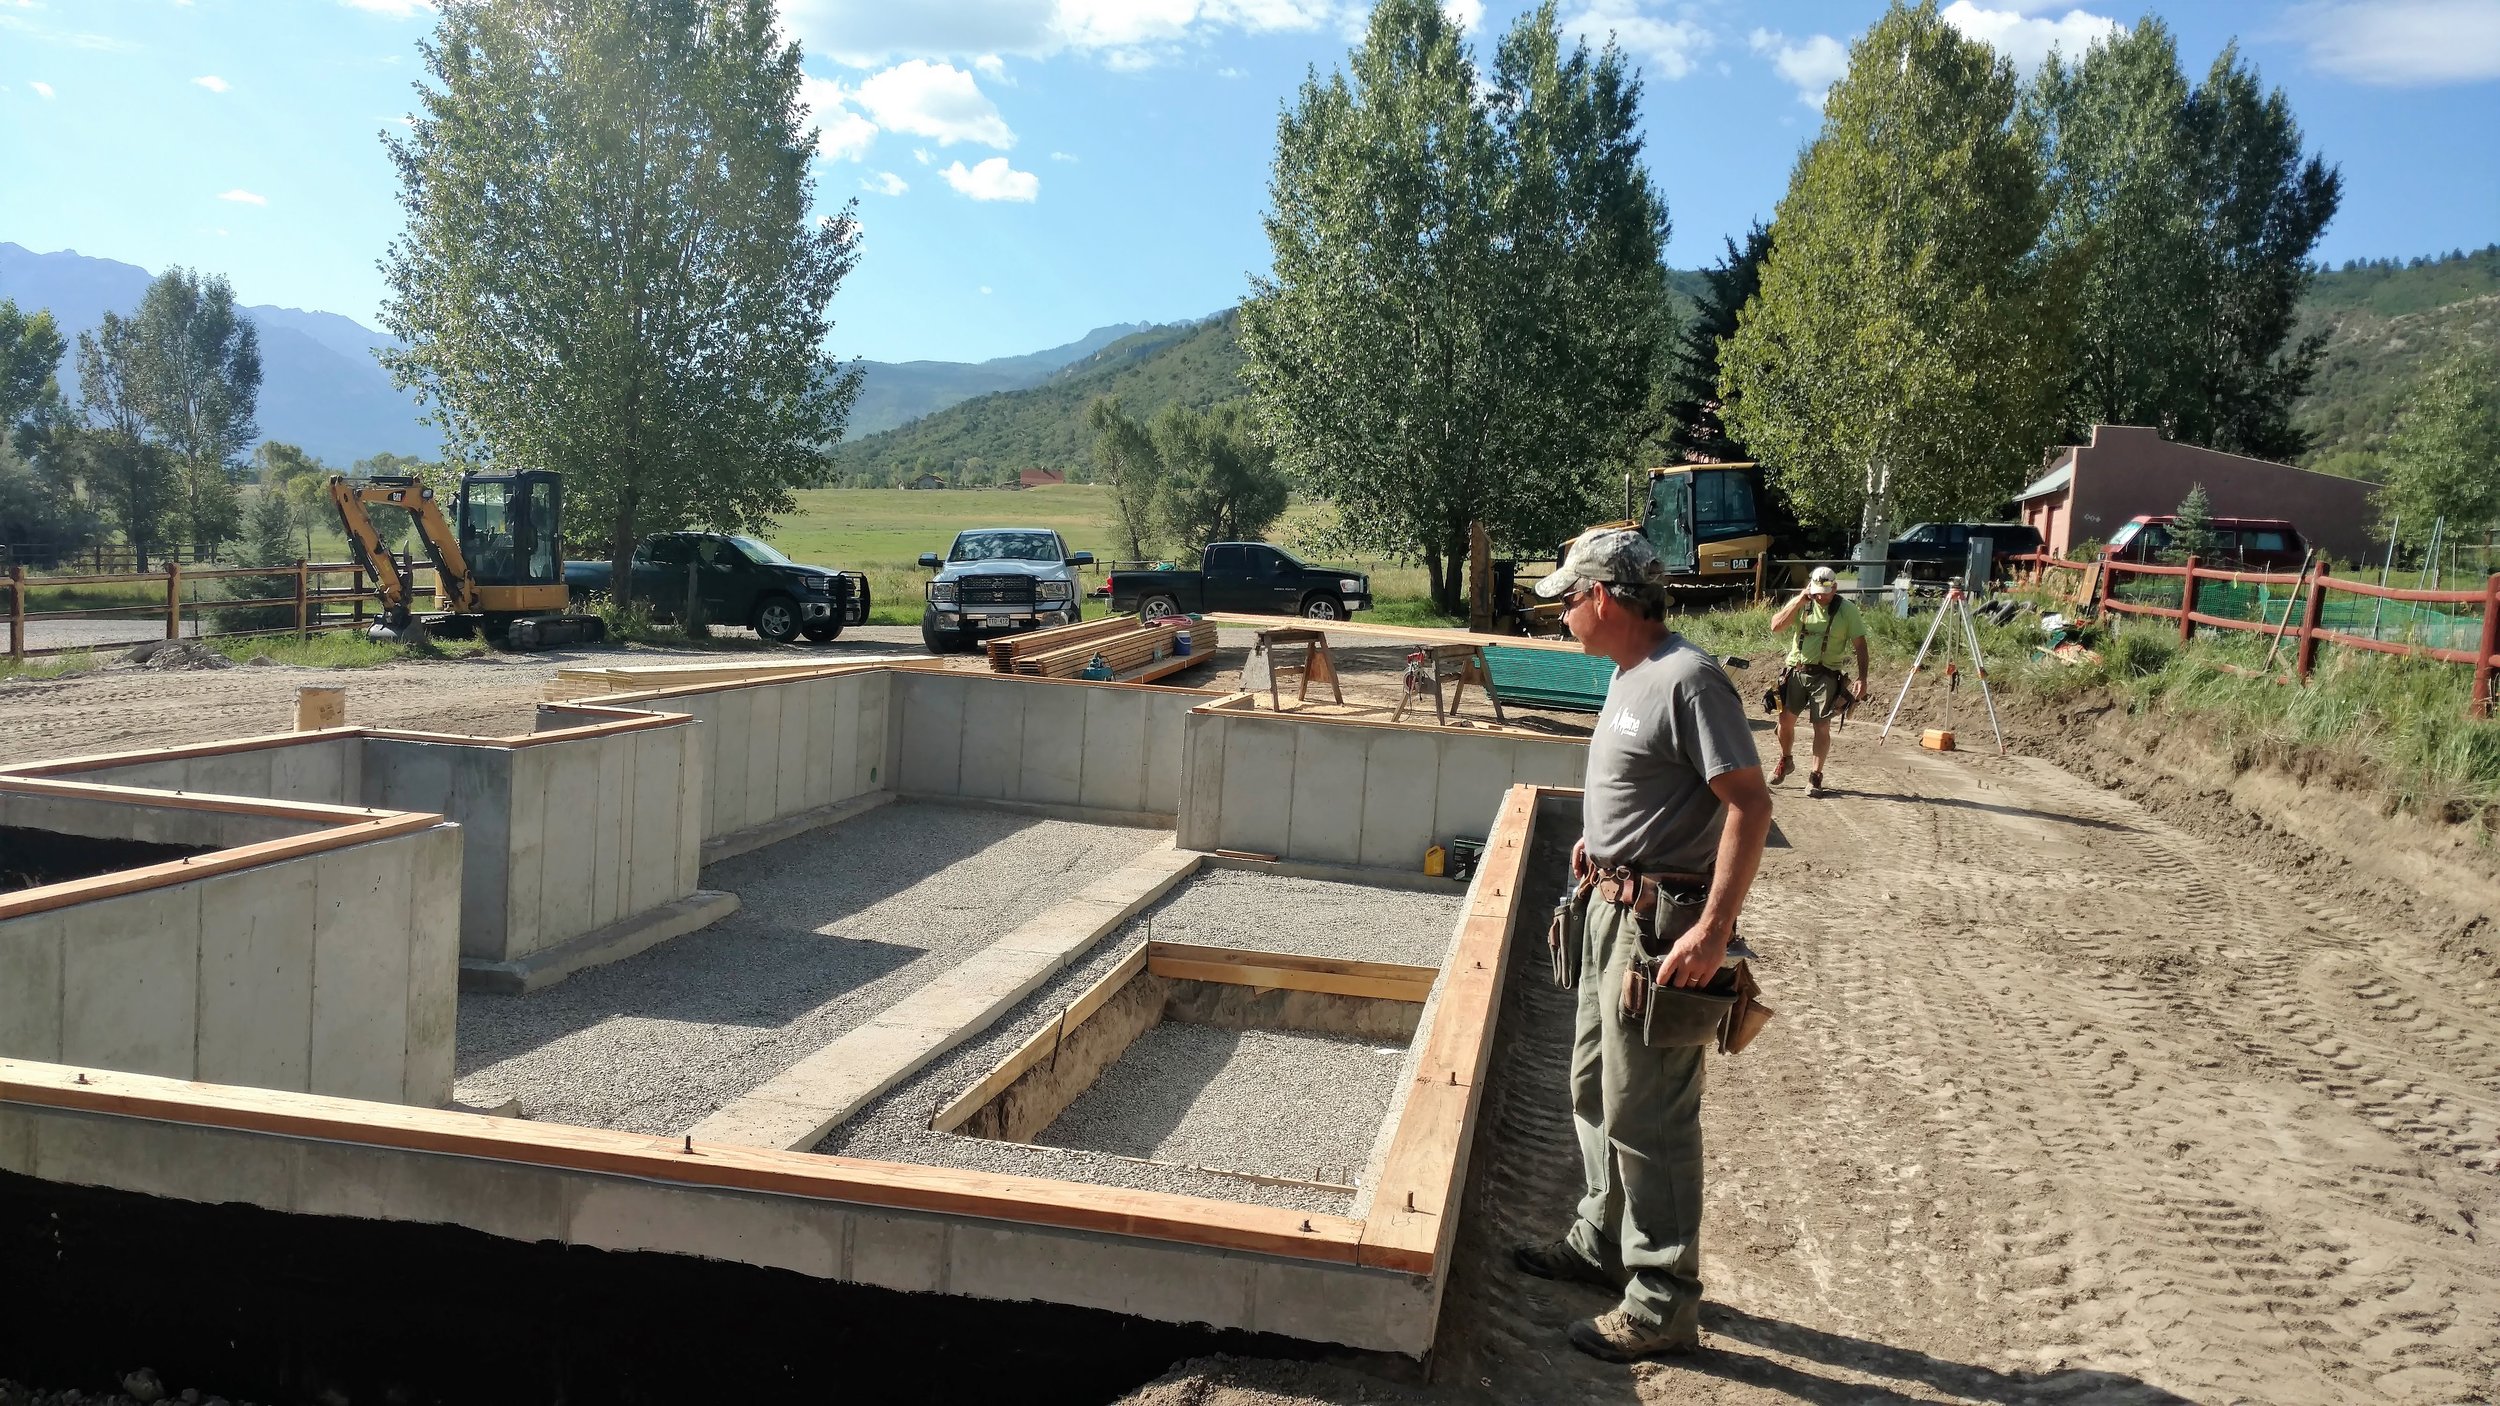 New Construction Blog Dci Custom, Steps To Building A House From The Ground Up